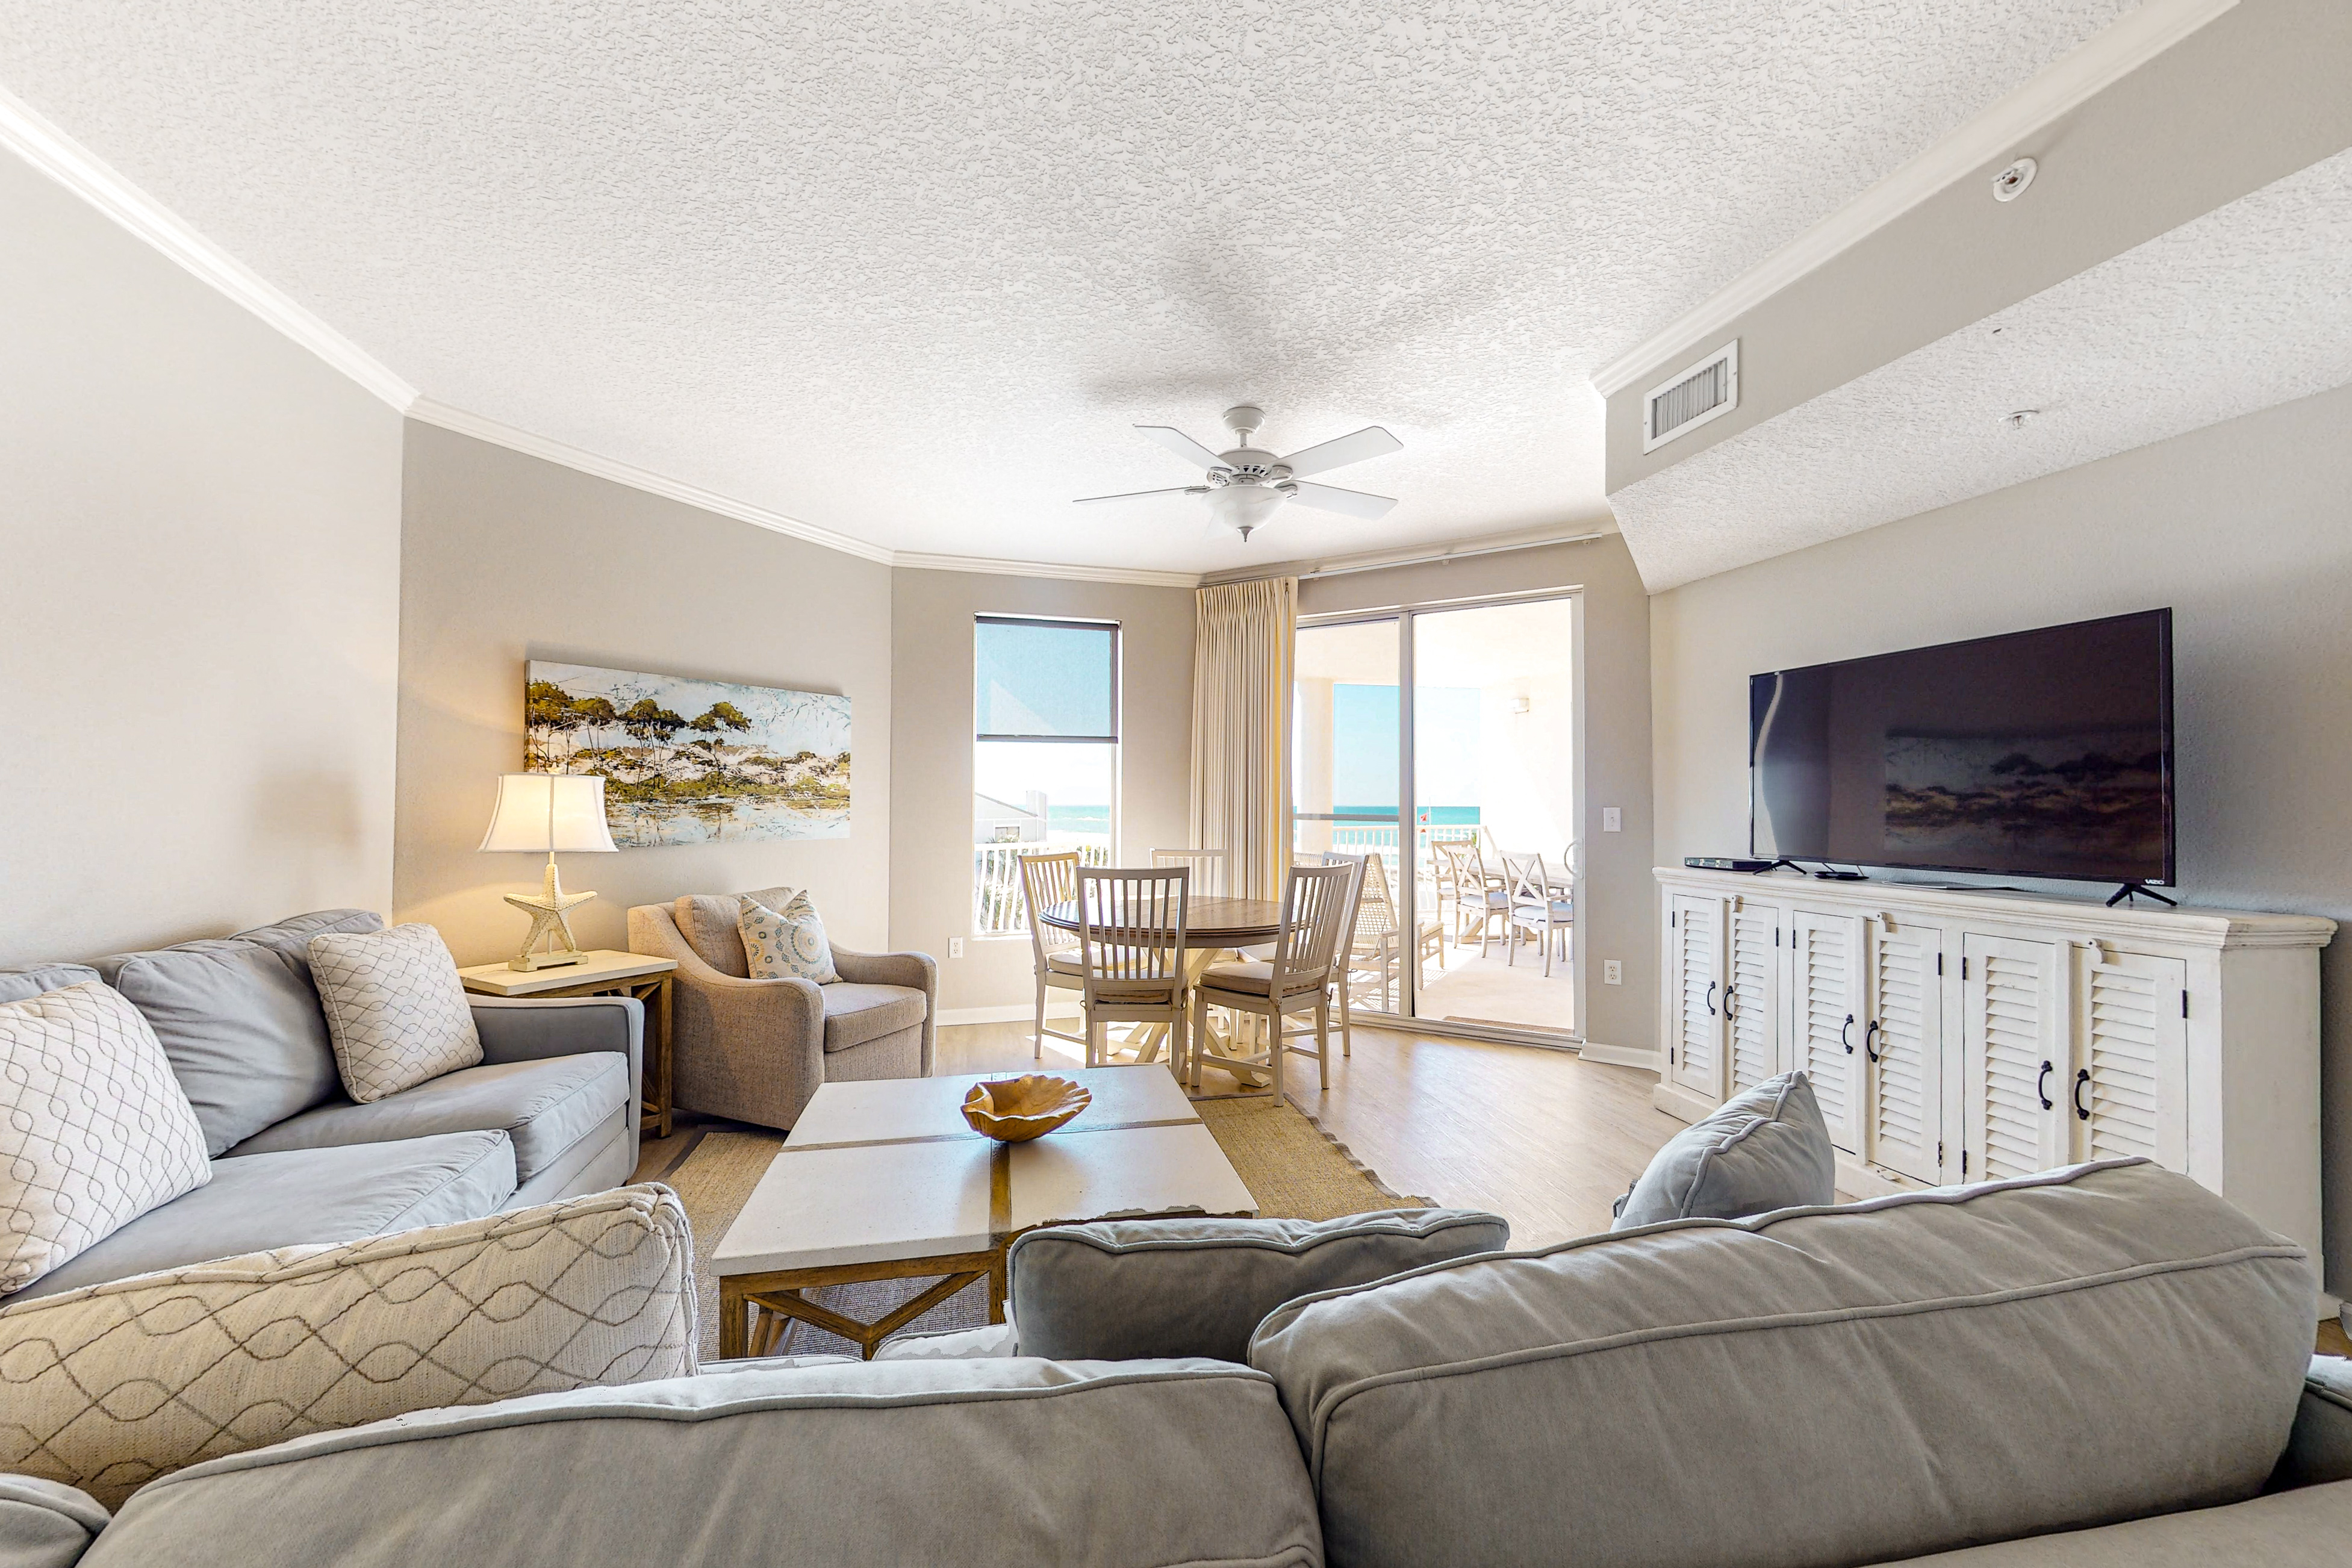 Dunes of Seagrove A301 Condo rental in Dunes of Seagrove in Highway 30-A Florida - #2